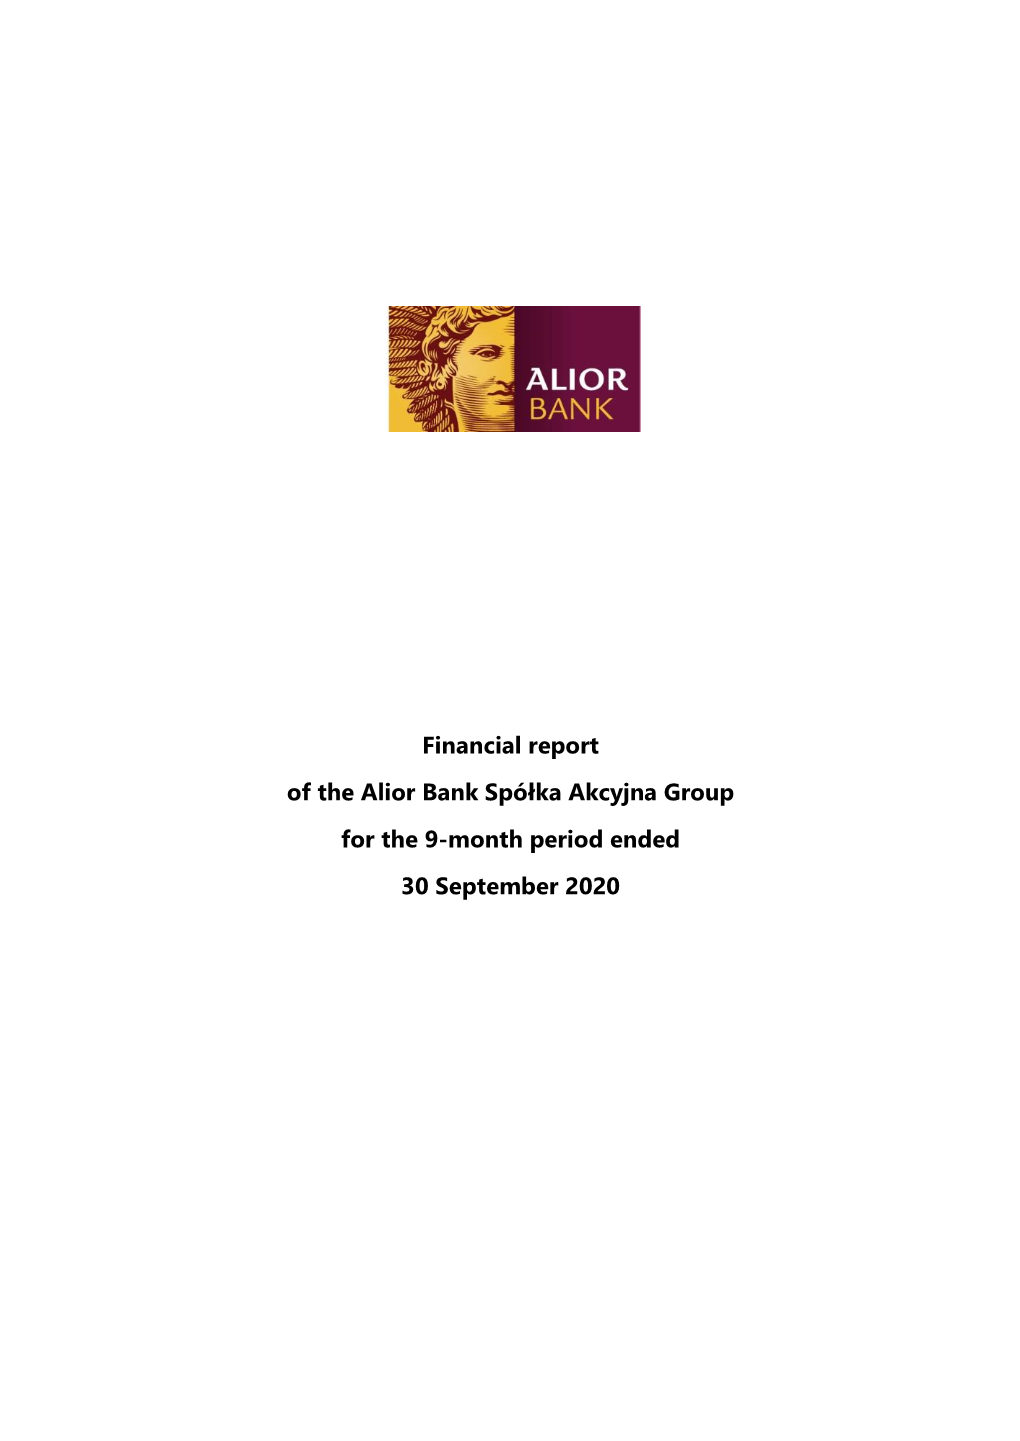 Financial Report of the Alior Bank Spółka Akcyjna Group for the 9-Month Period Ended 30 September 2020